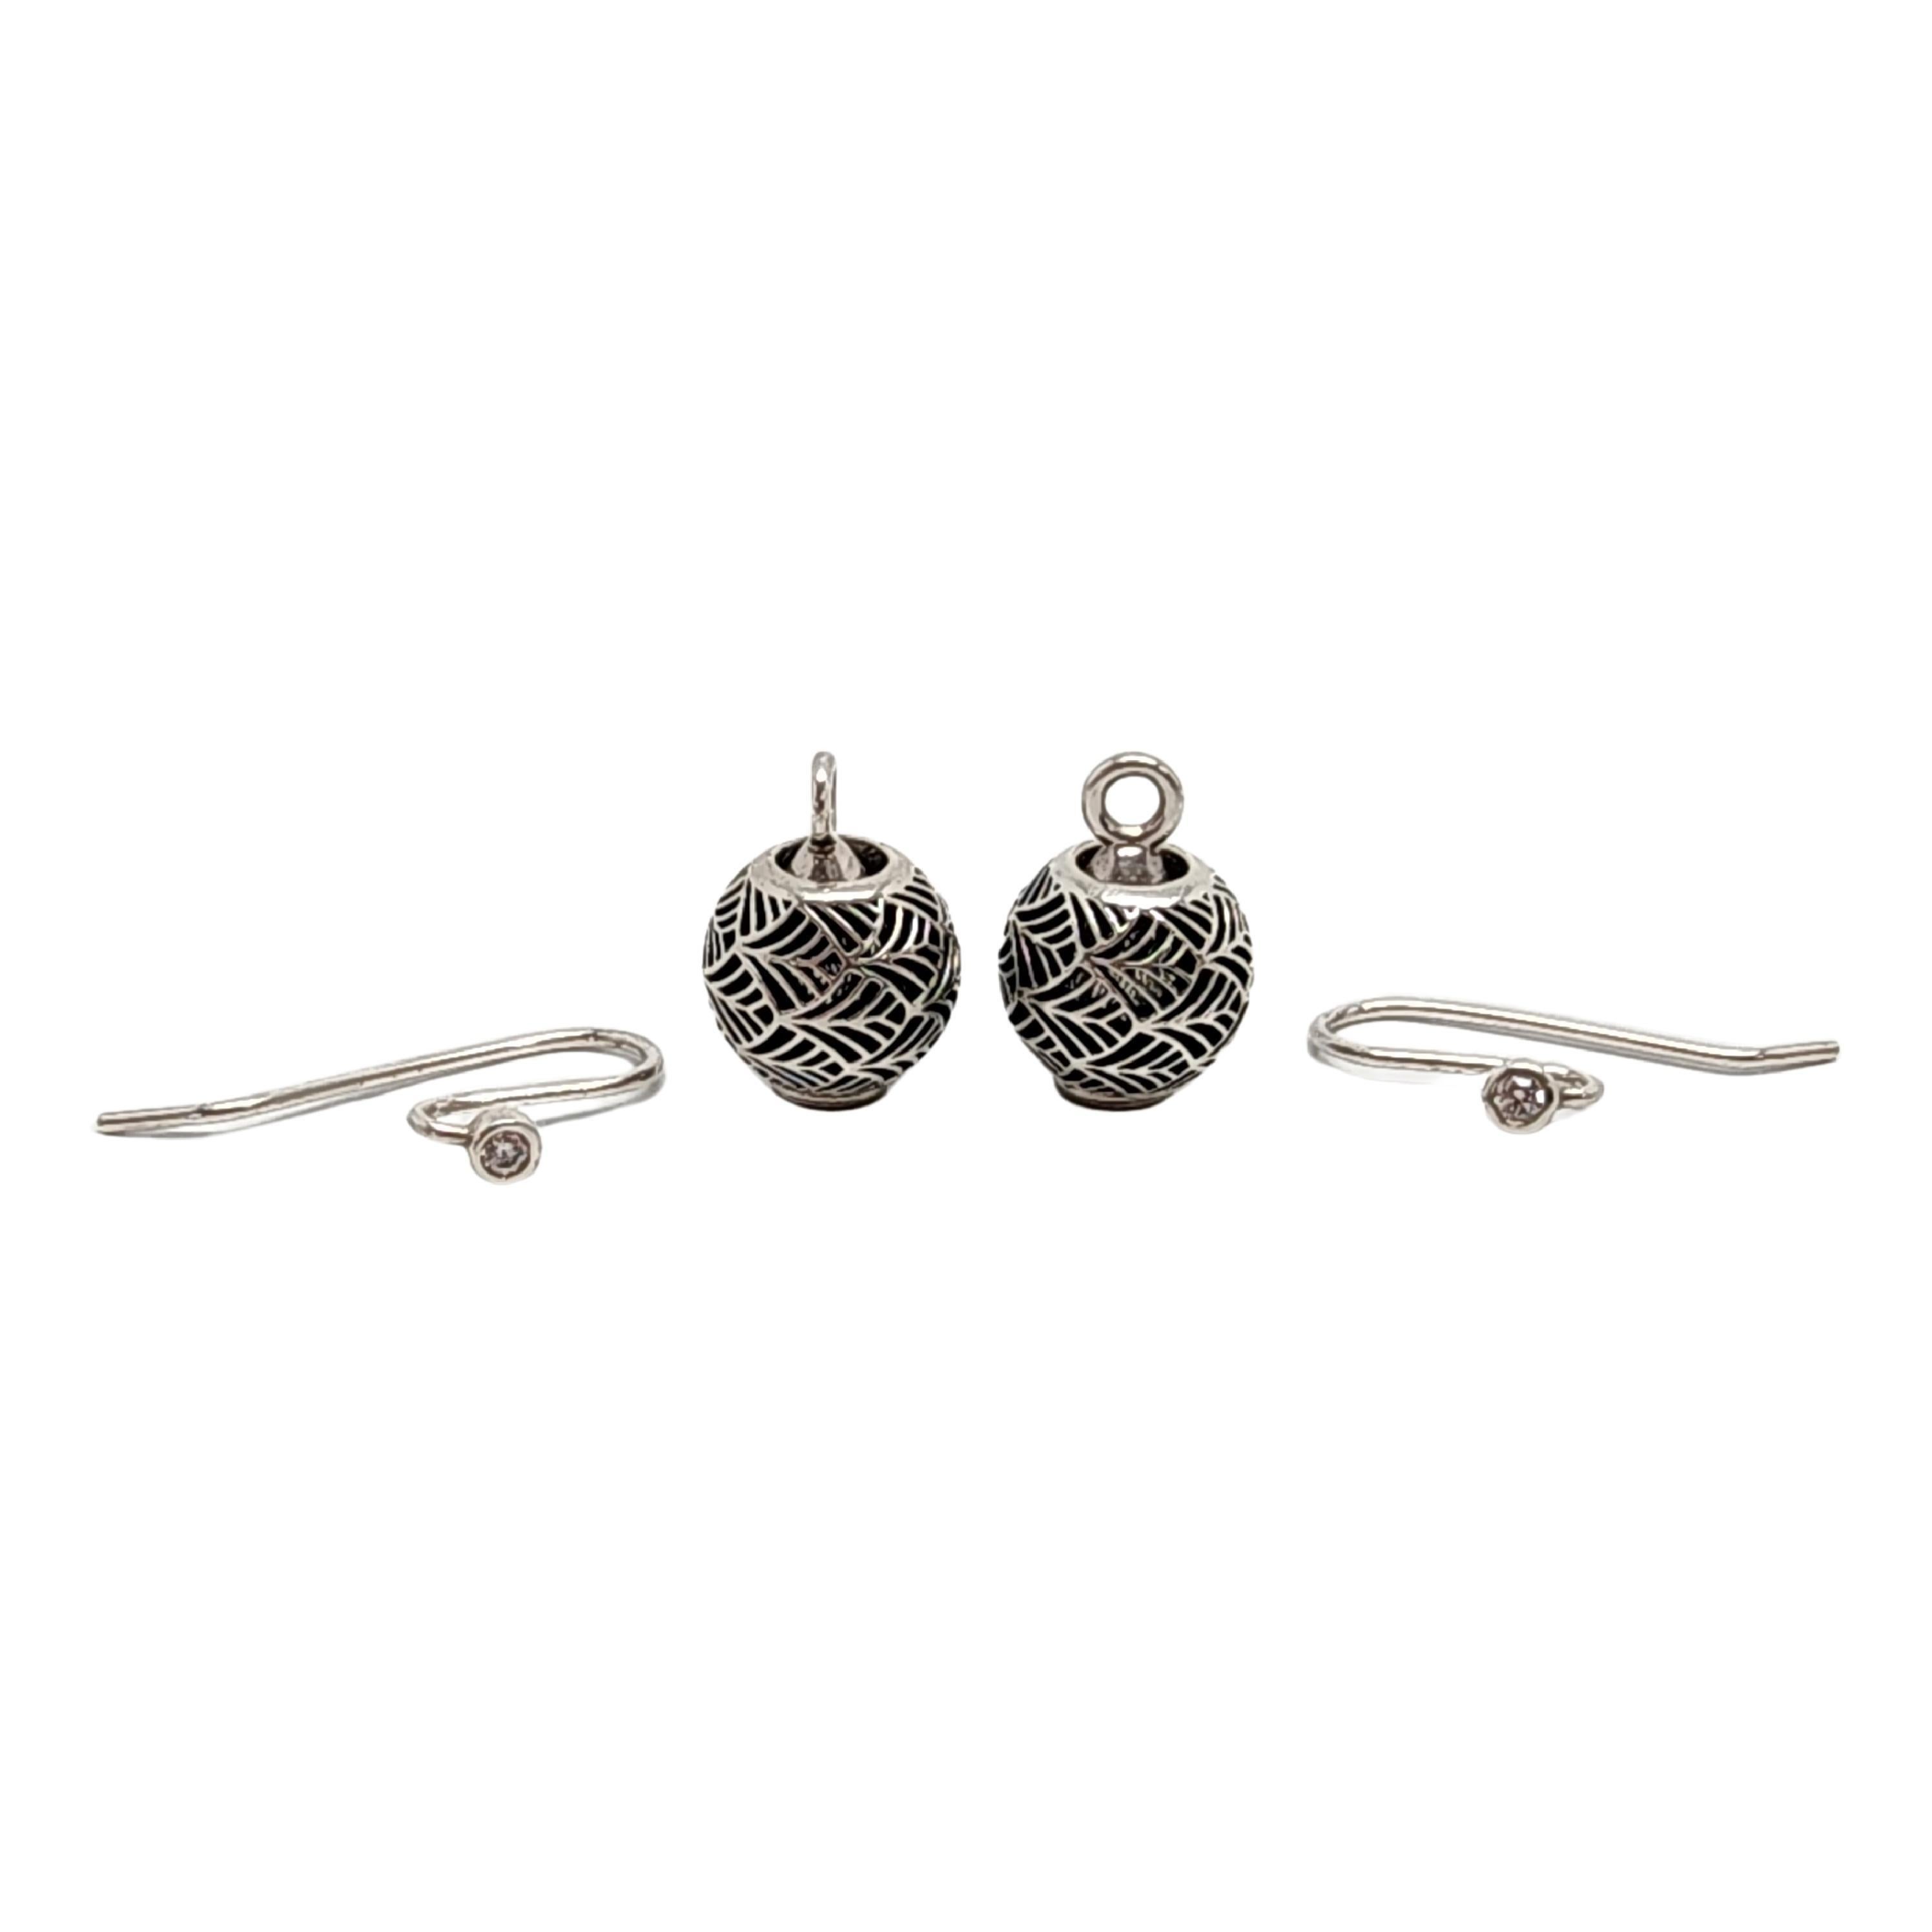 Pandora Sterling Silver Compose Hook Barrel Tropicana Bead Earrings #16045 In Good Condition For Sale In Washington Depot, CT